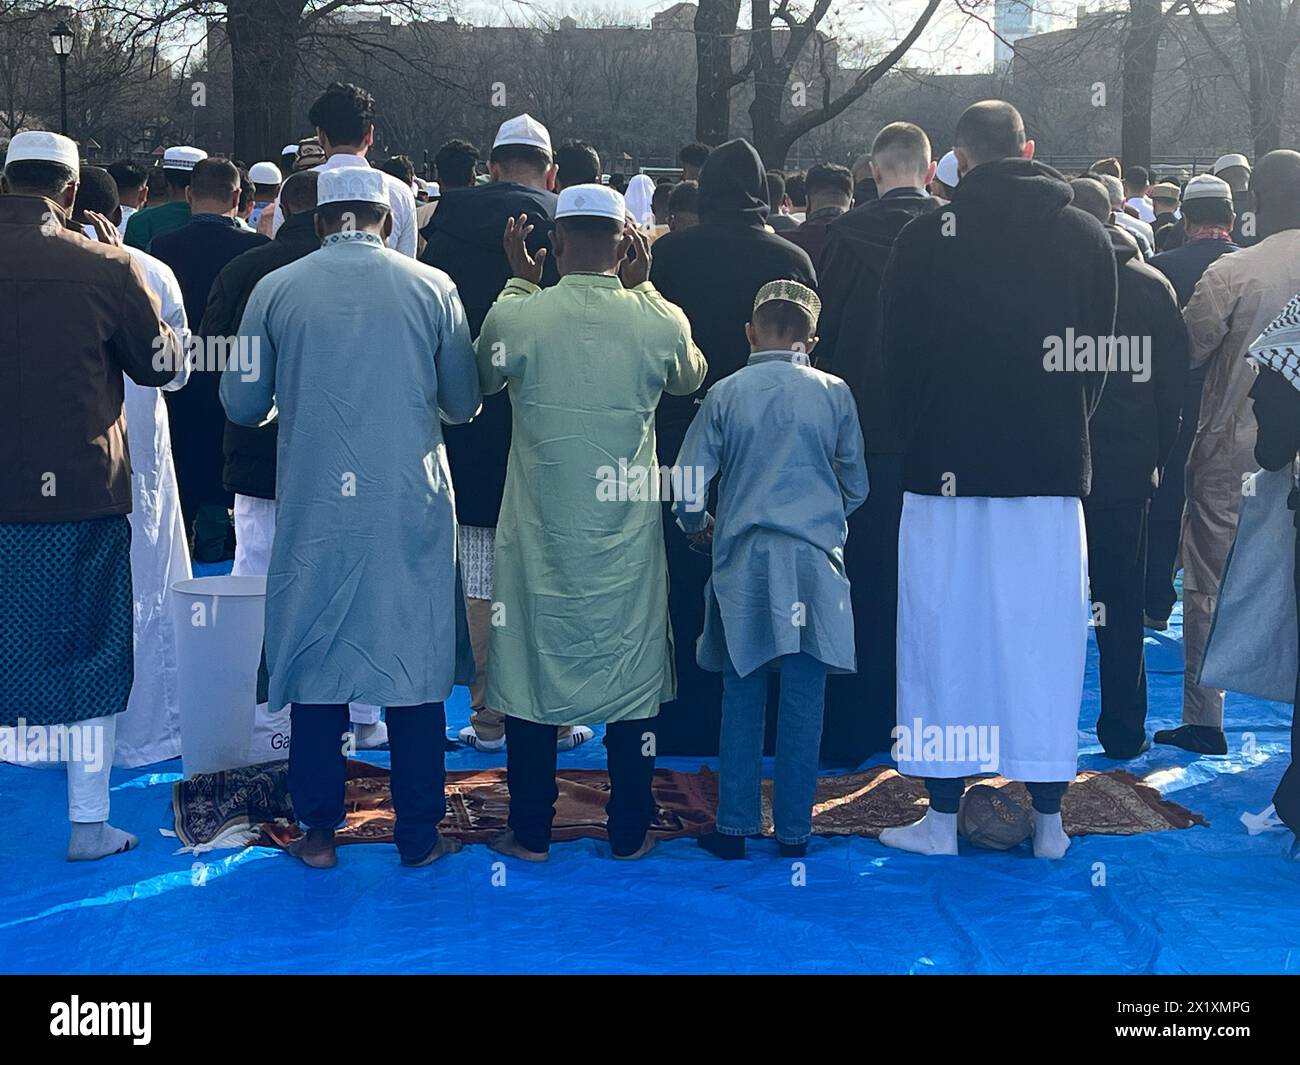 Muslims come together for Prayer at the Parade Grounds by Prospect Park after the month of Ramadan on Eid al-Fitr in Brooklyn, New York. Stock Photo